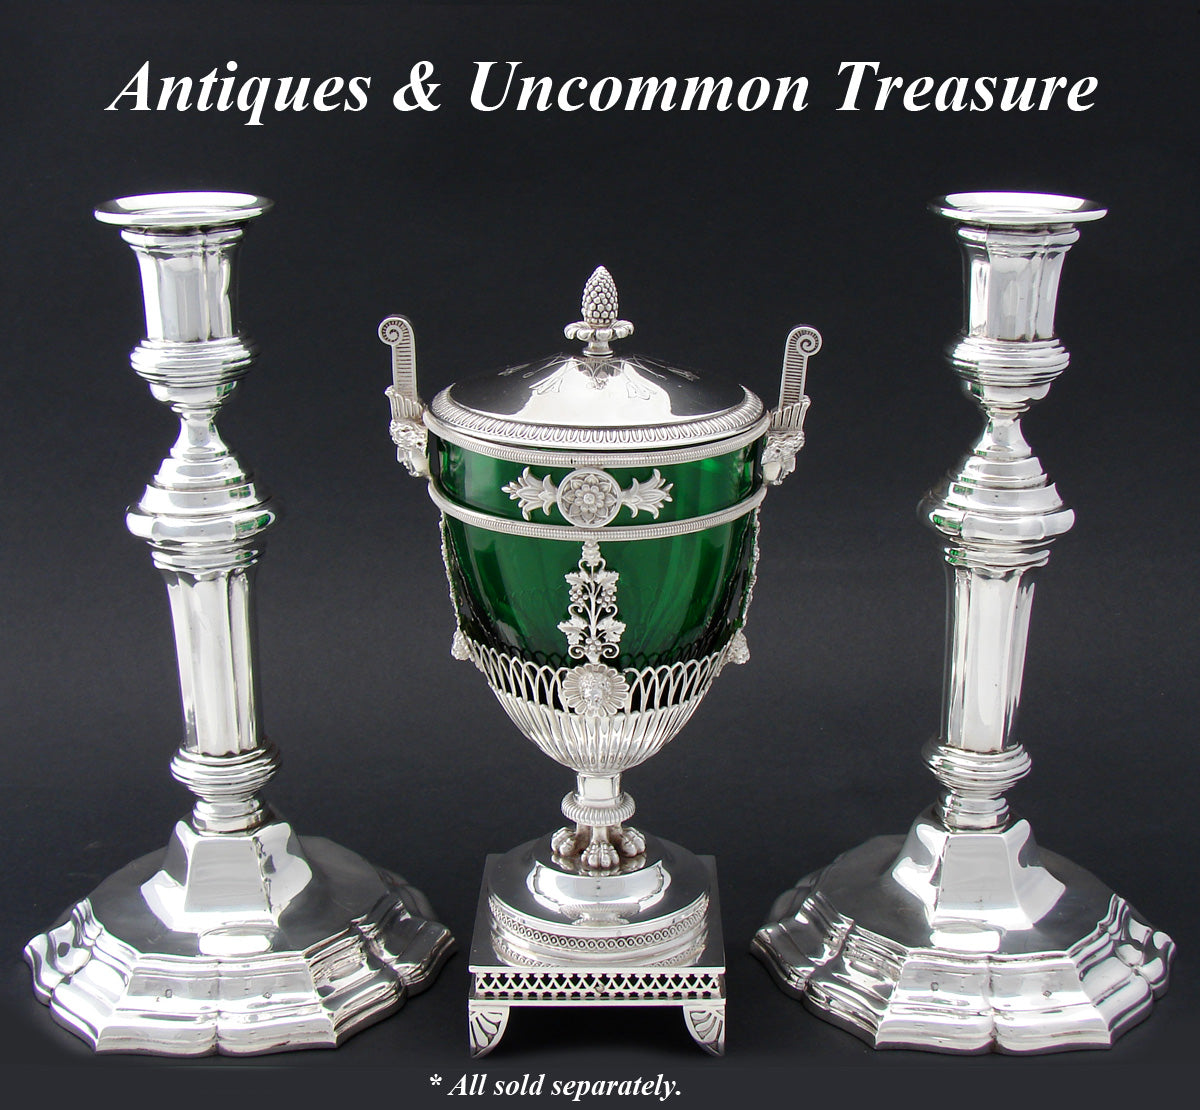 RARE Antique French Sterling Silver 9 3/4” Candlestick PAIR, Elegant Classical Styling